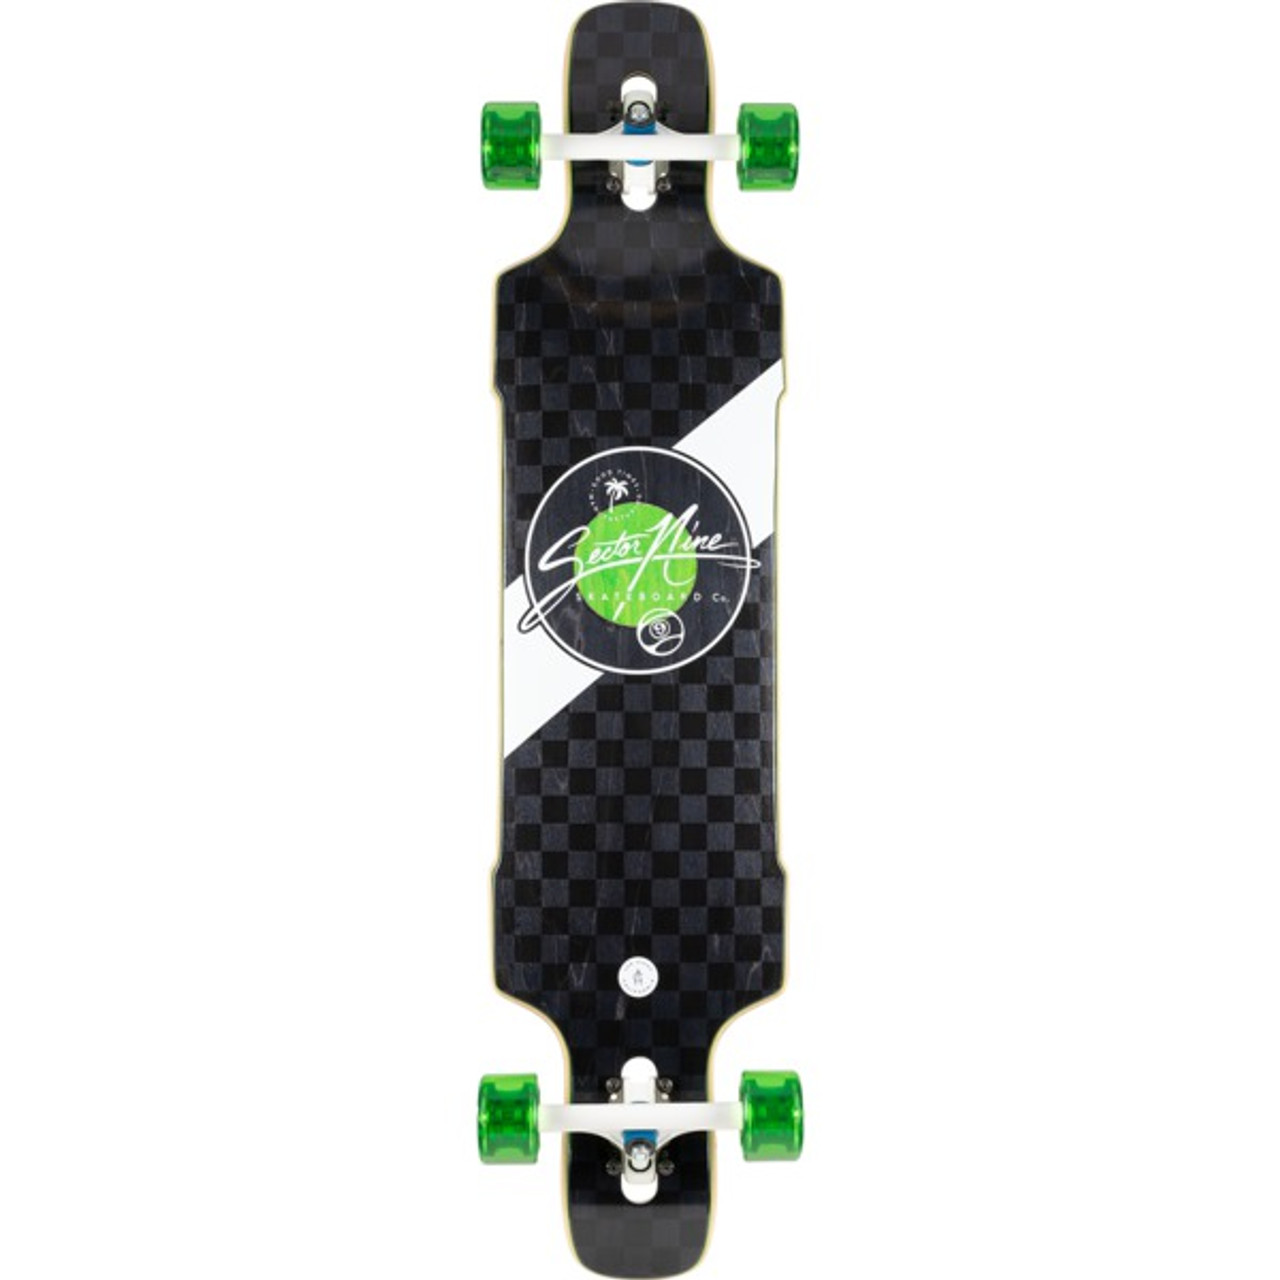 Sector 9 Mosaic Dropper Skateboard Complete White Green 9.62x41